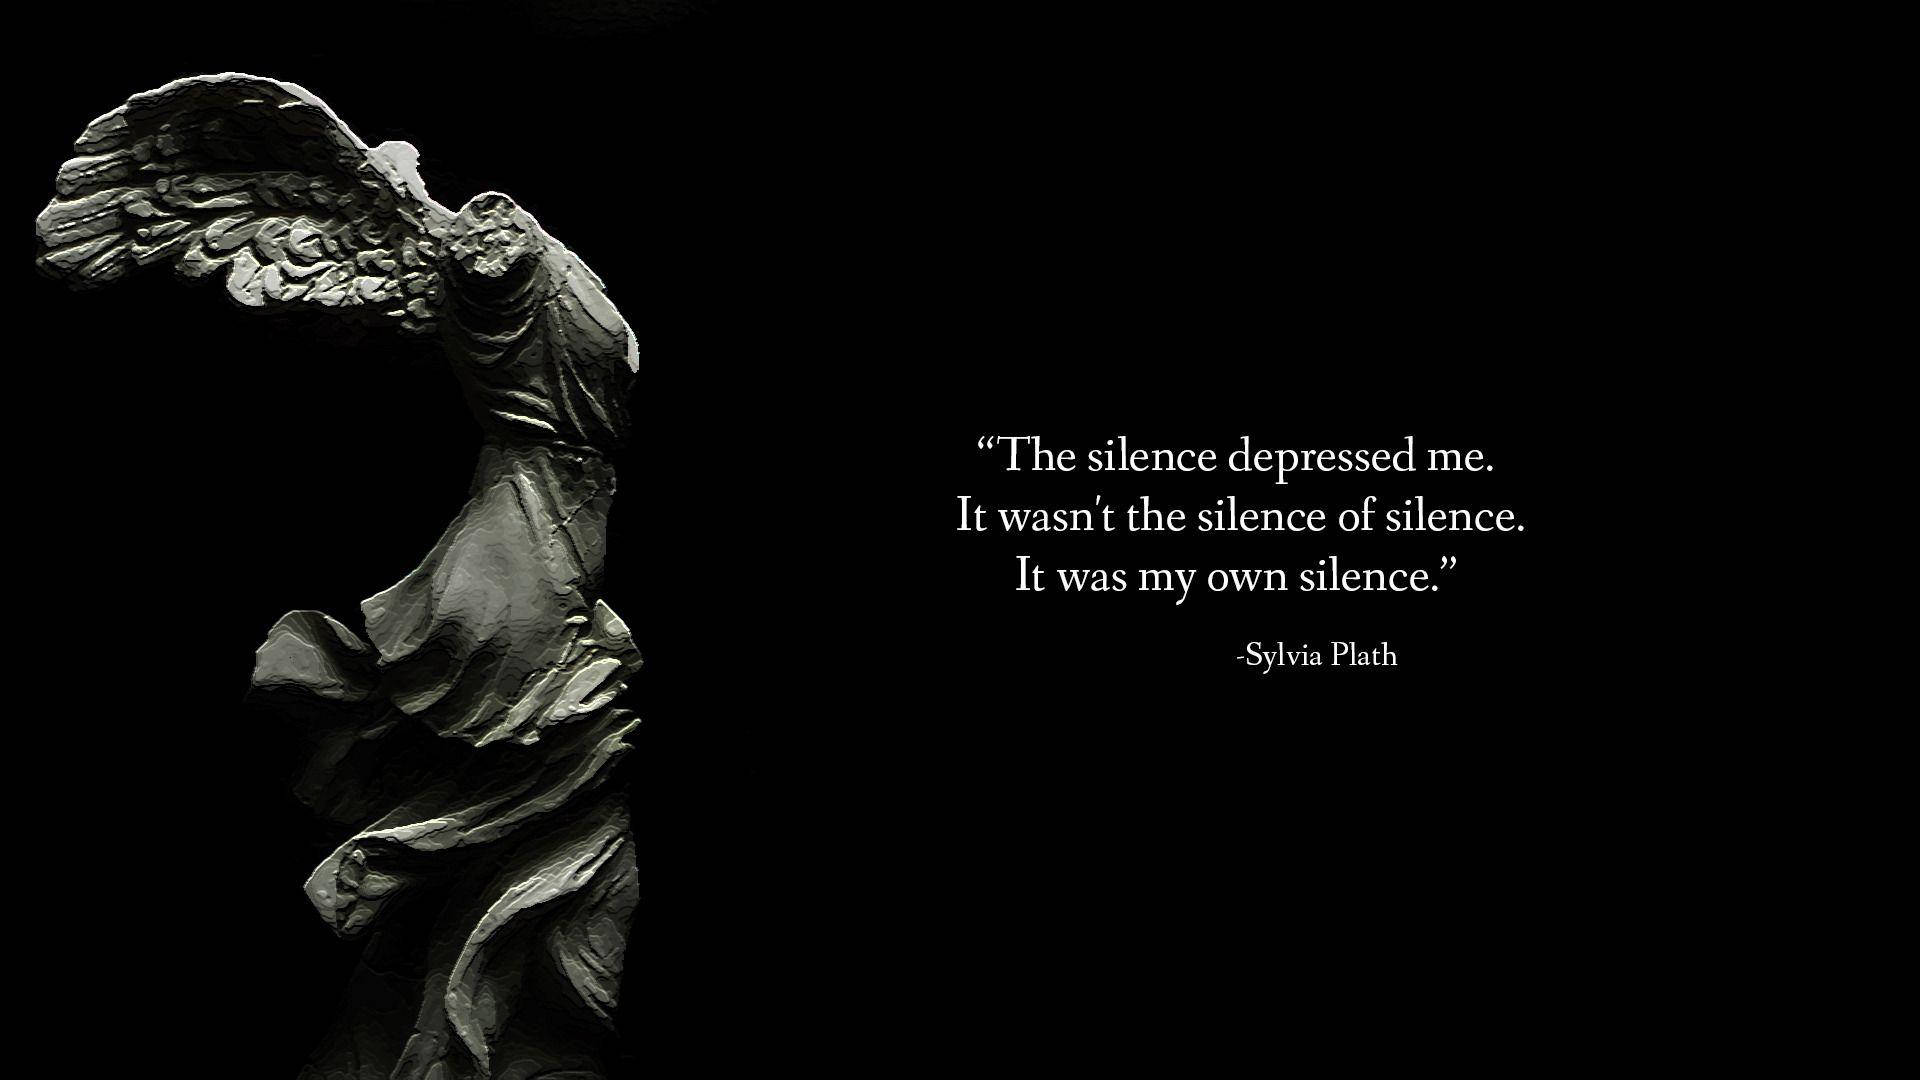 Free Dark Quotes Wallpaper Downloads, [100+] Dark Quotes Wallpapers for  FREE 